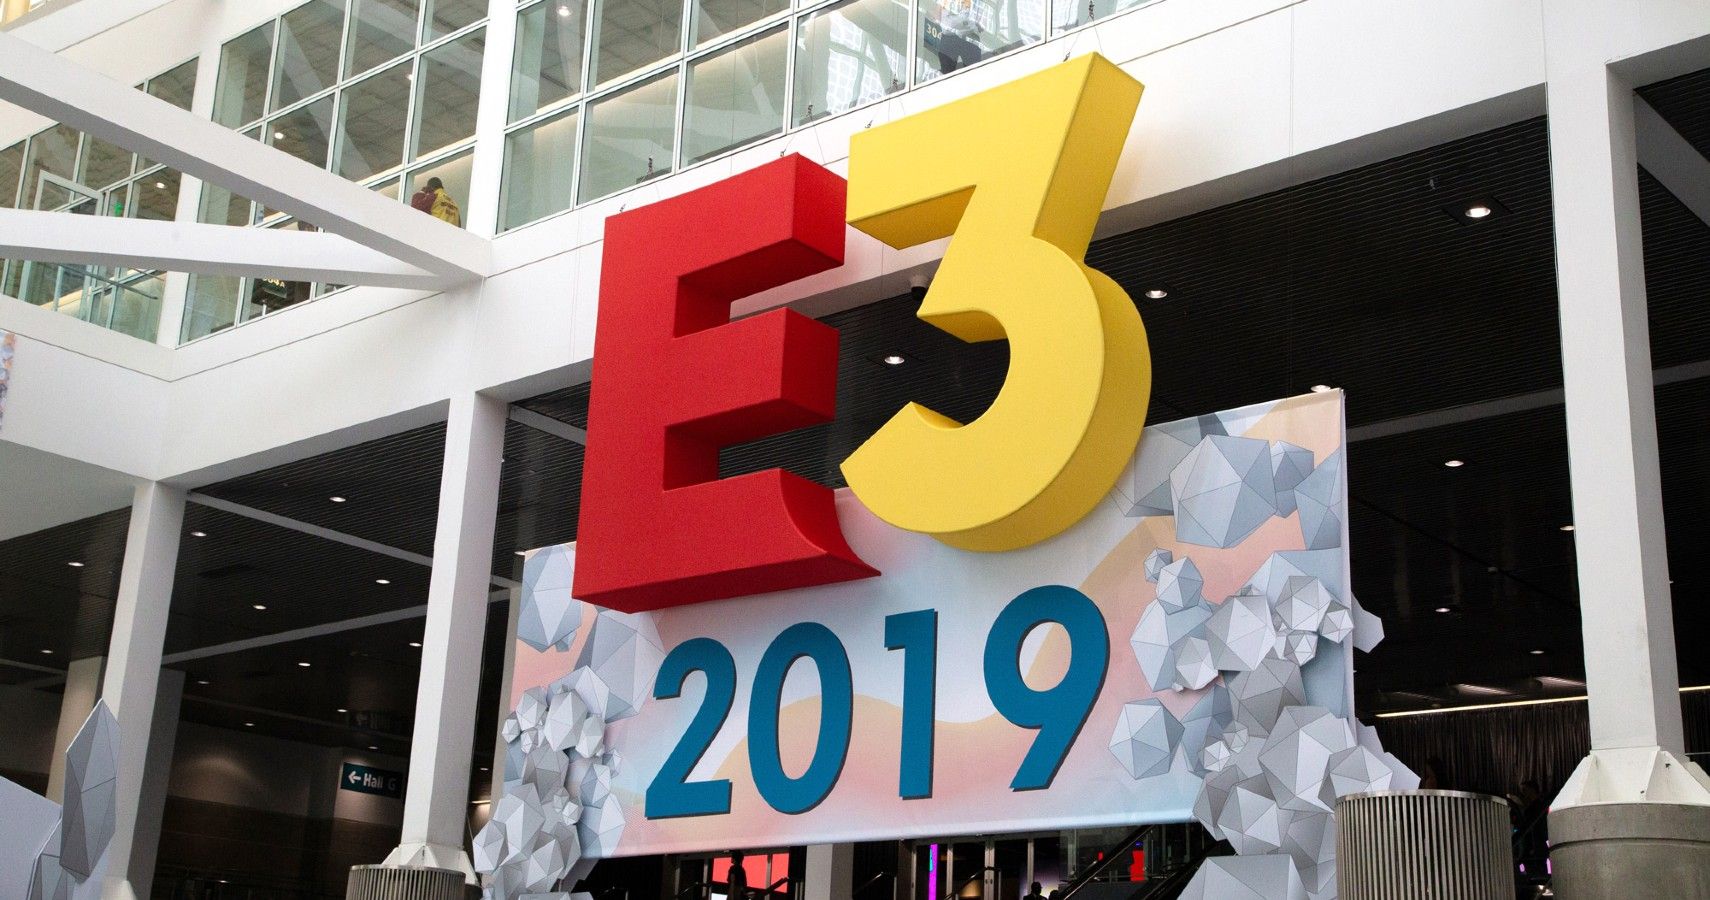 New Study Shows That Media Attendance For E3 Has Been Declining